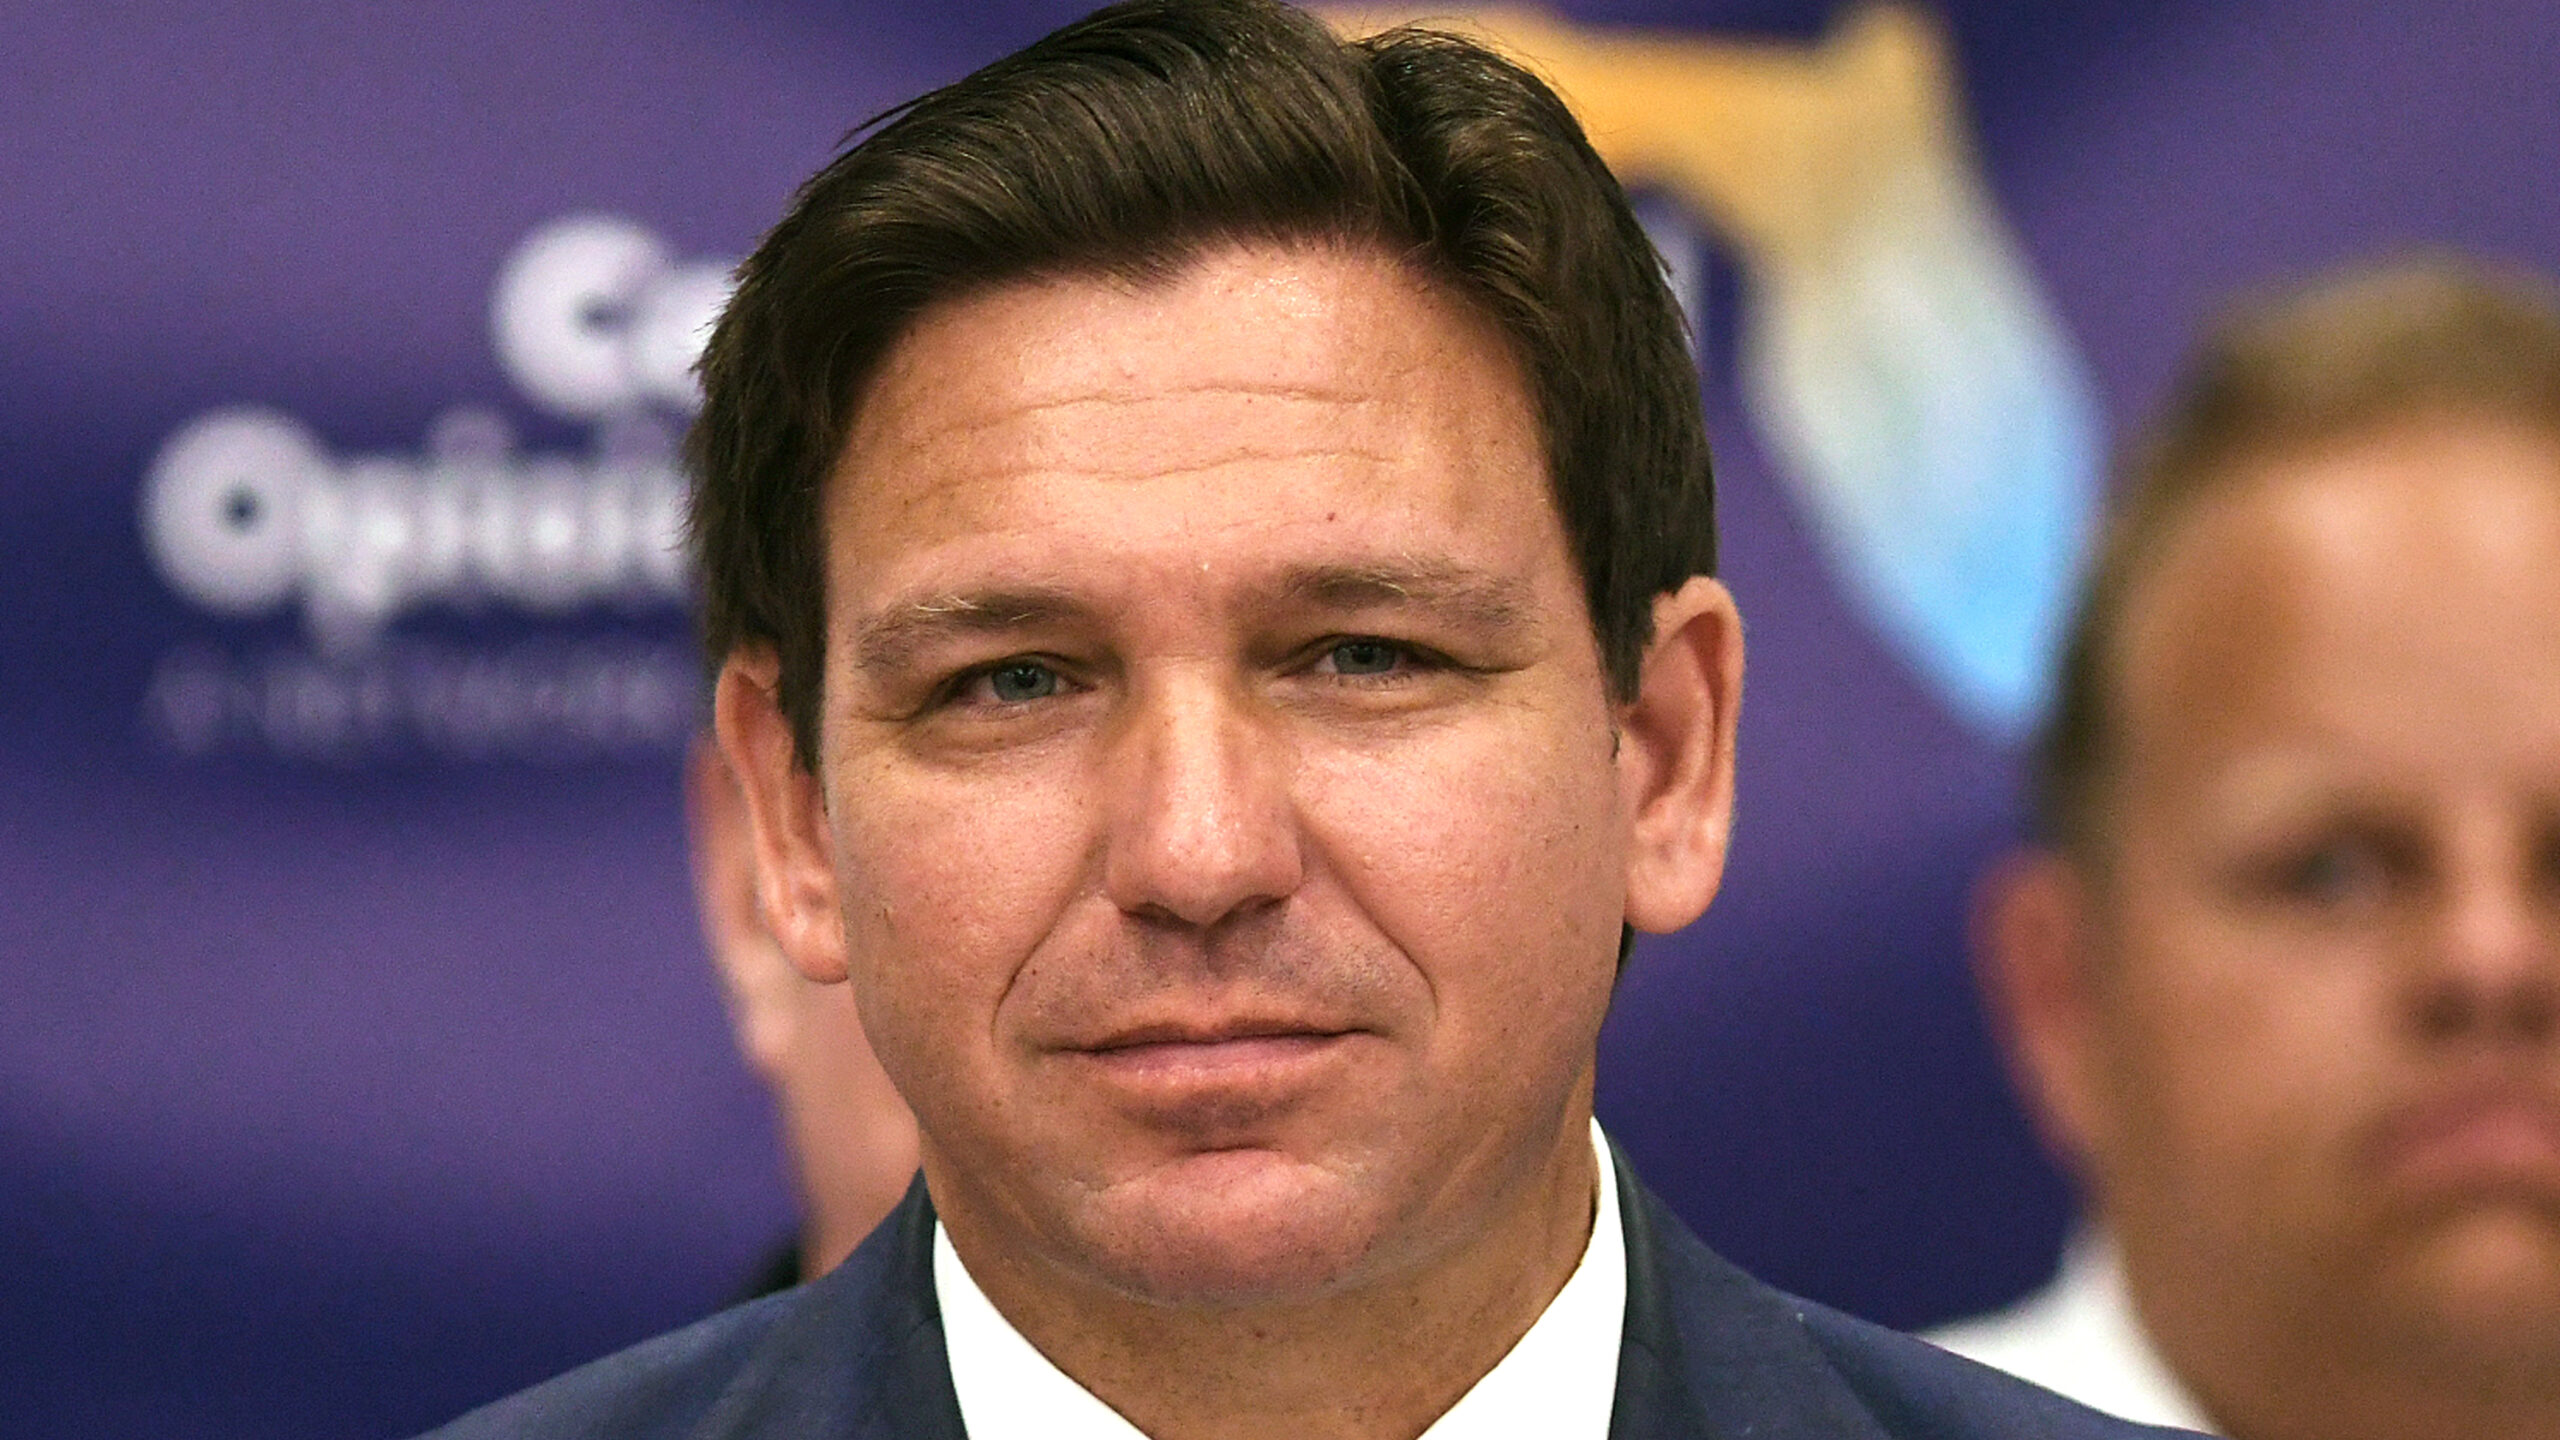 DeSantis Sends Police To Remove Woke Soros Prosecutor From Office For Failing To Enforce Laws